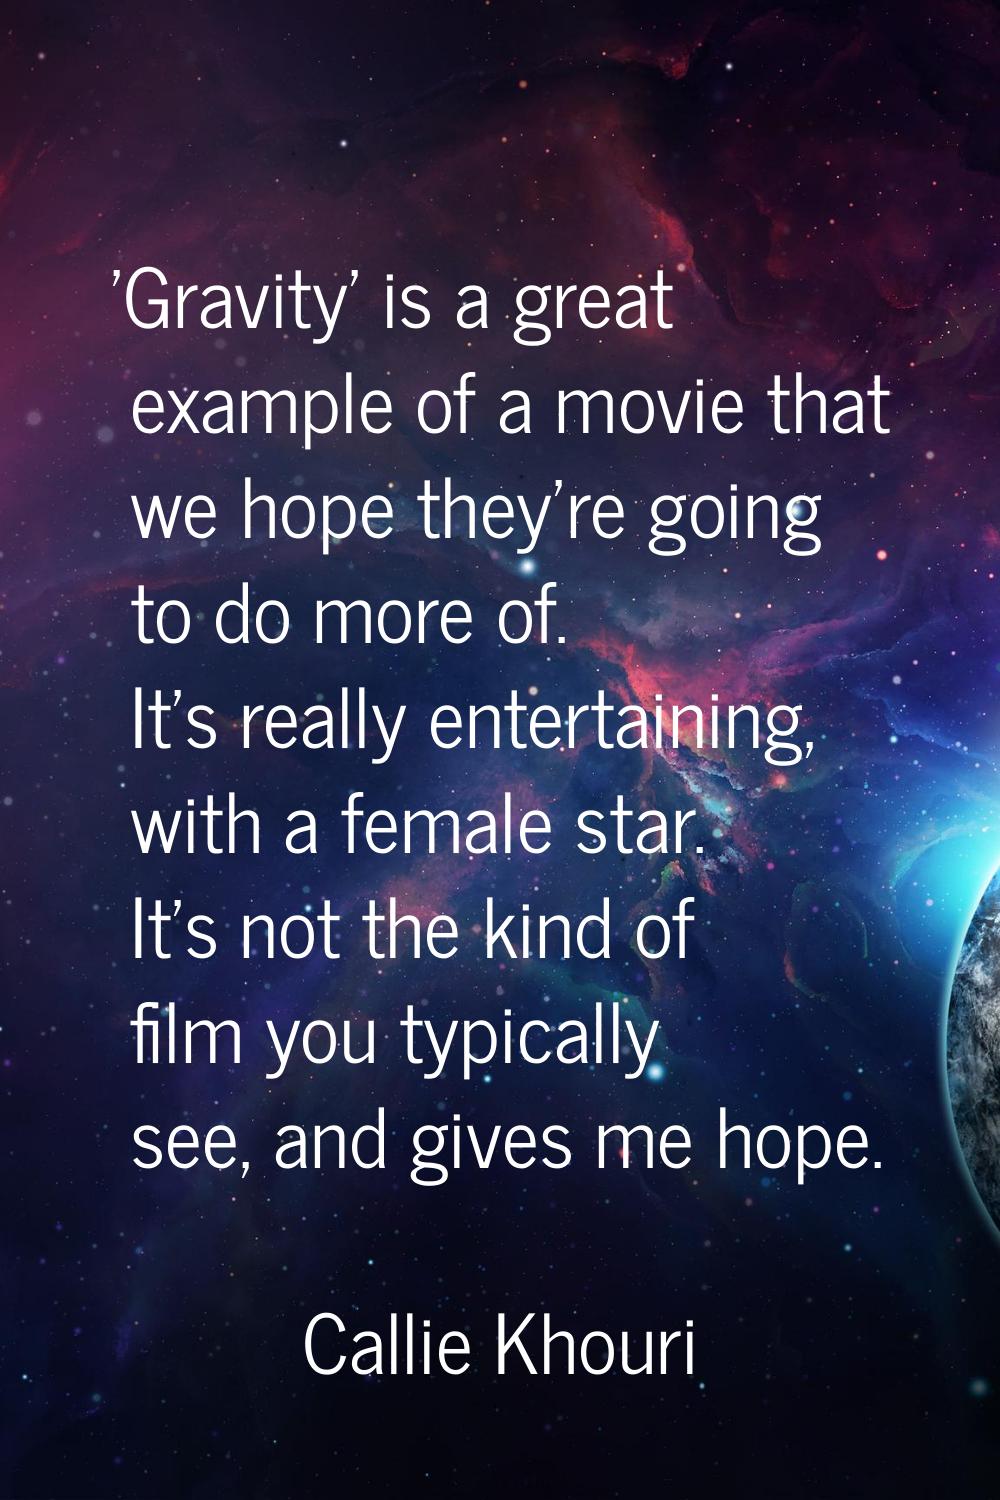 'Gravity' is a great example of a movie that we hope they're going to do more of. It's really enter